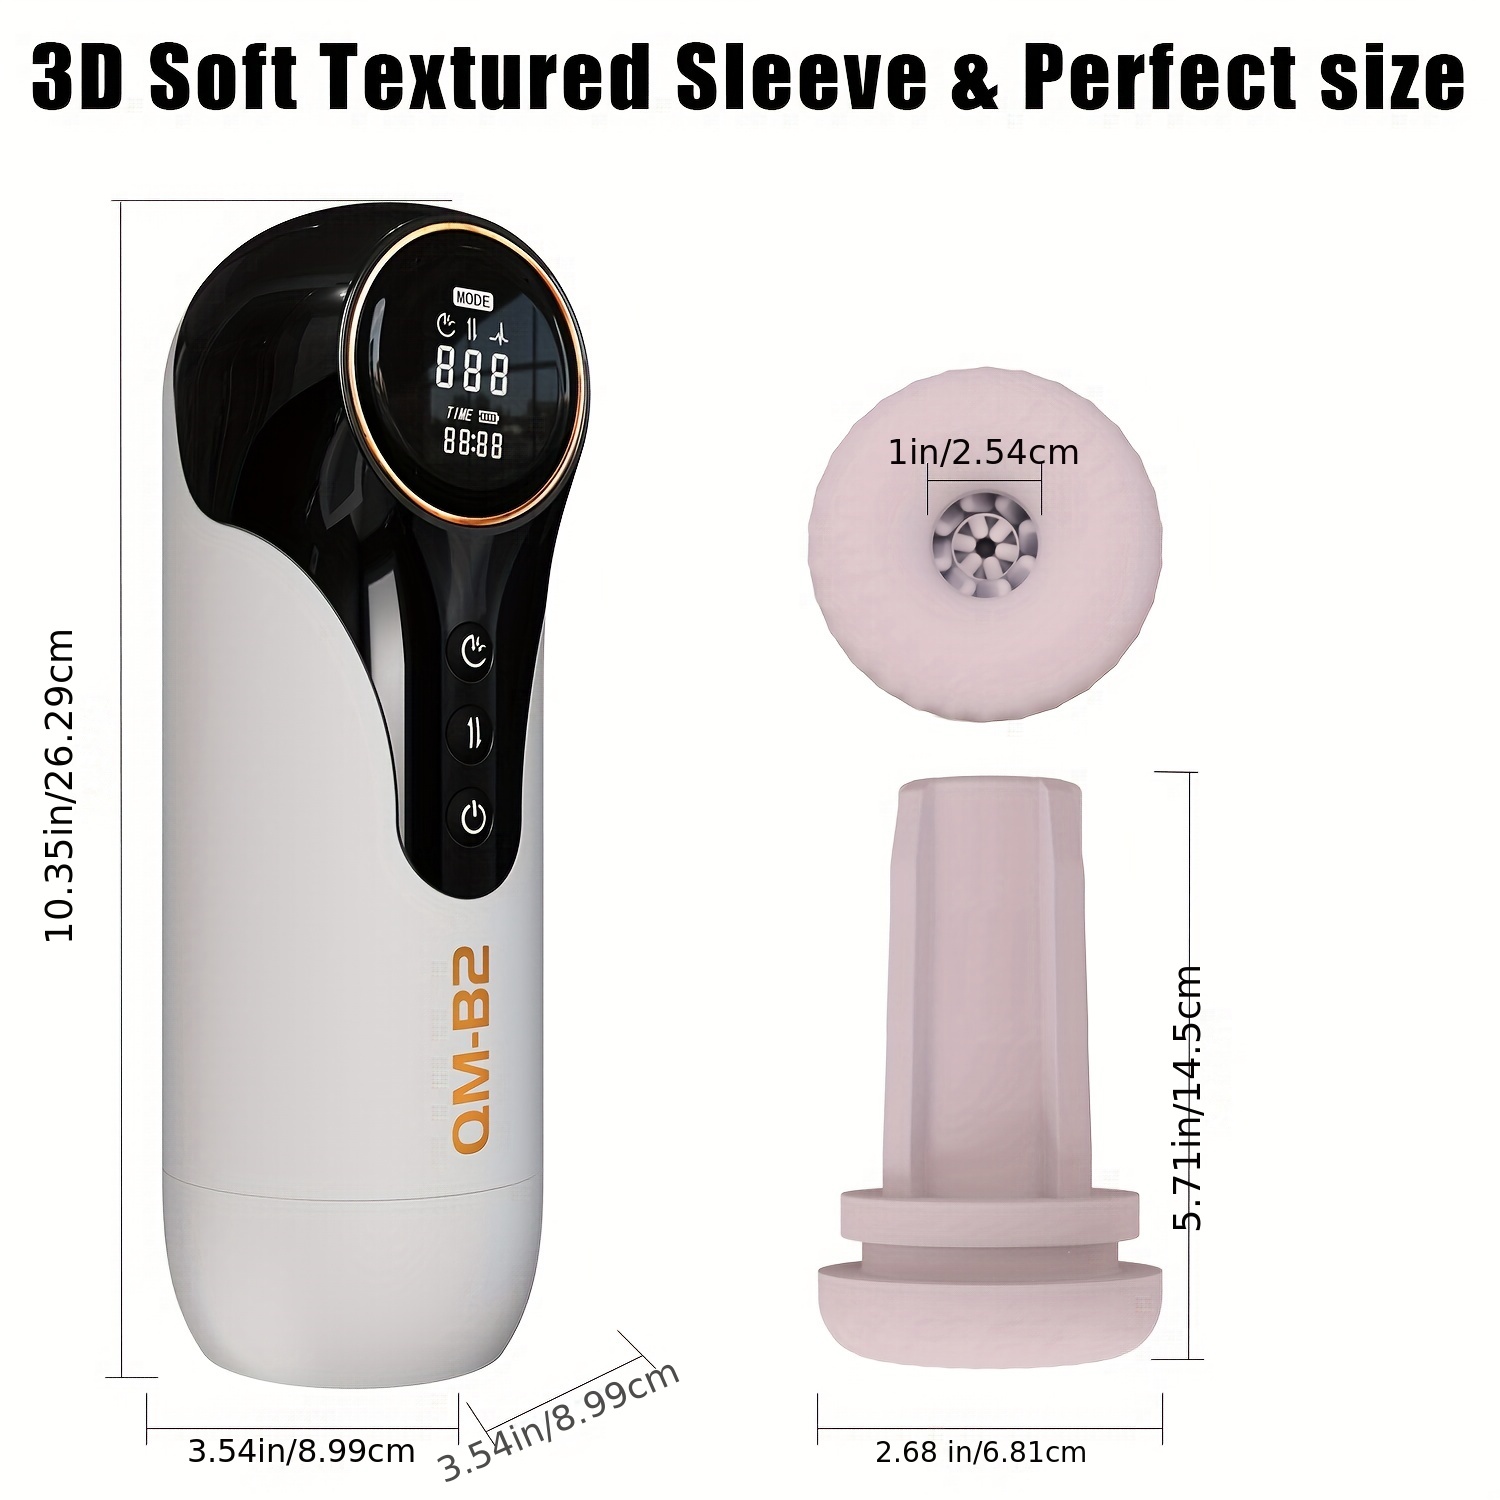 Excite Yourself Automatic Male Masturbator With 4 Suction and Thrusting, 10 Frequency Vibrations For Penis Stimulation!